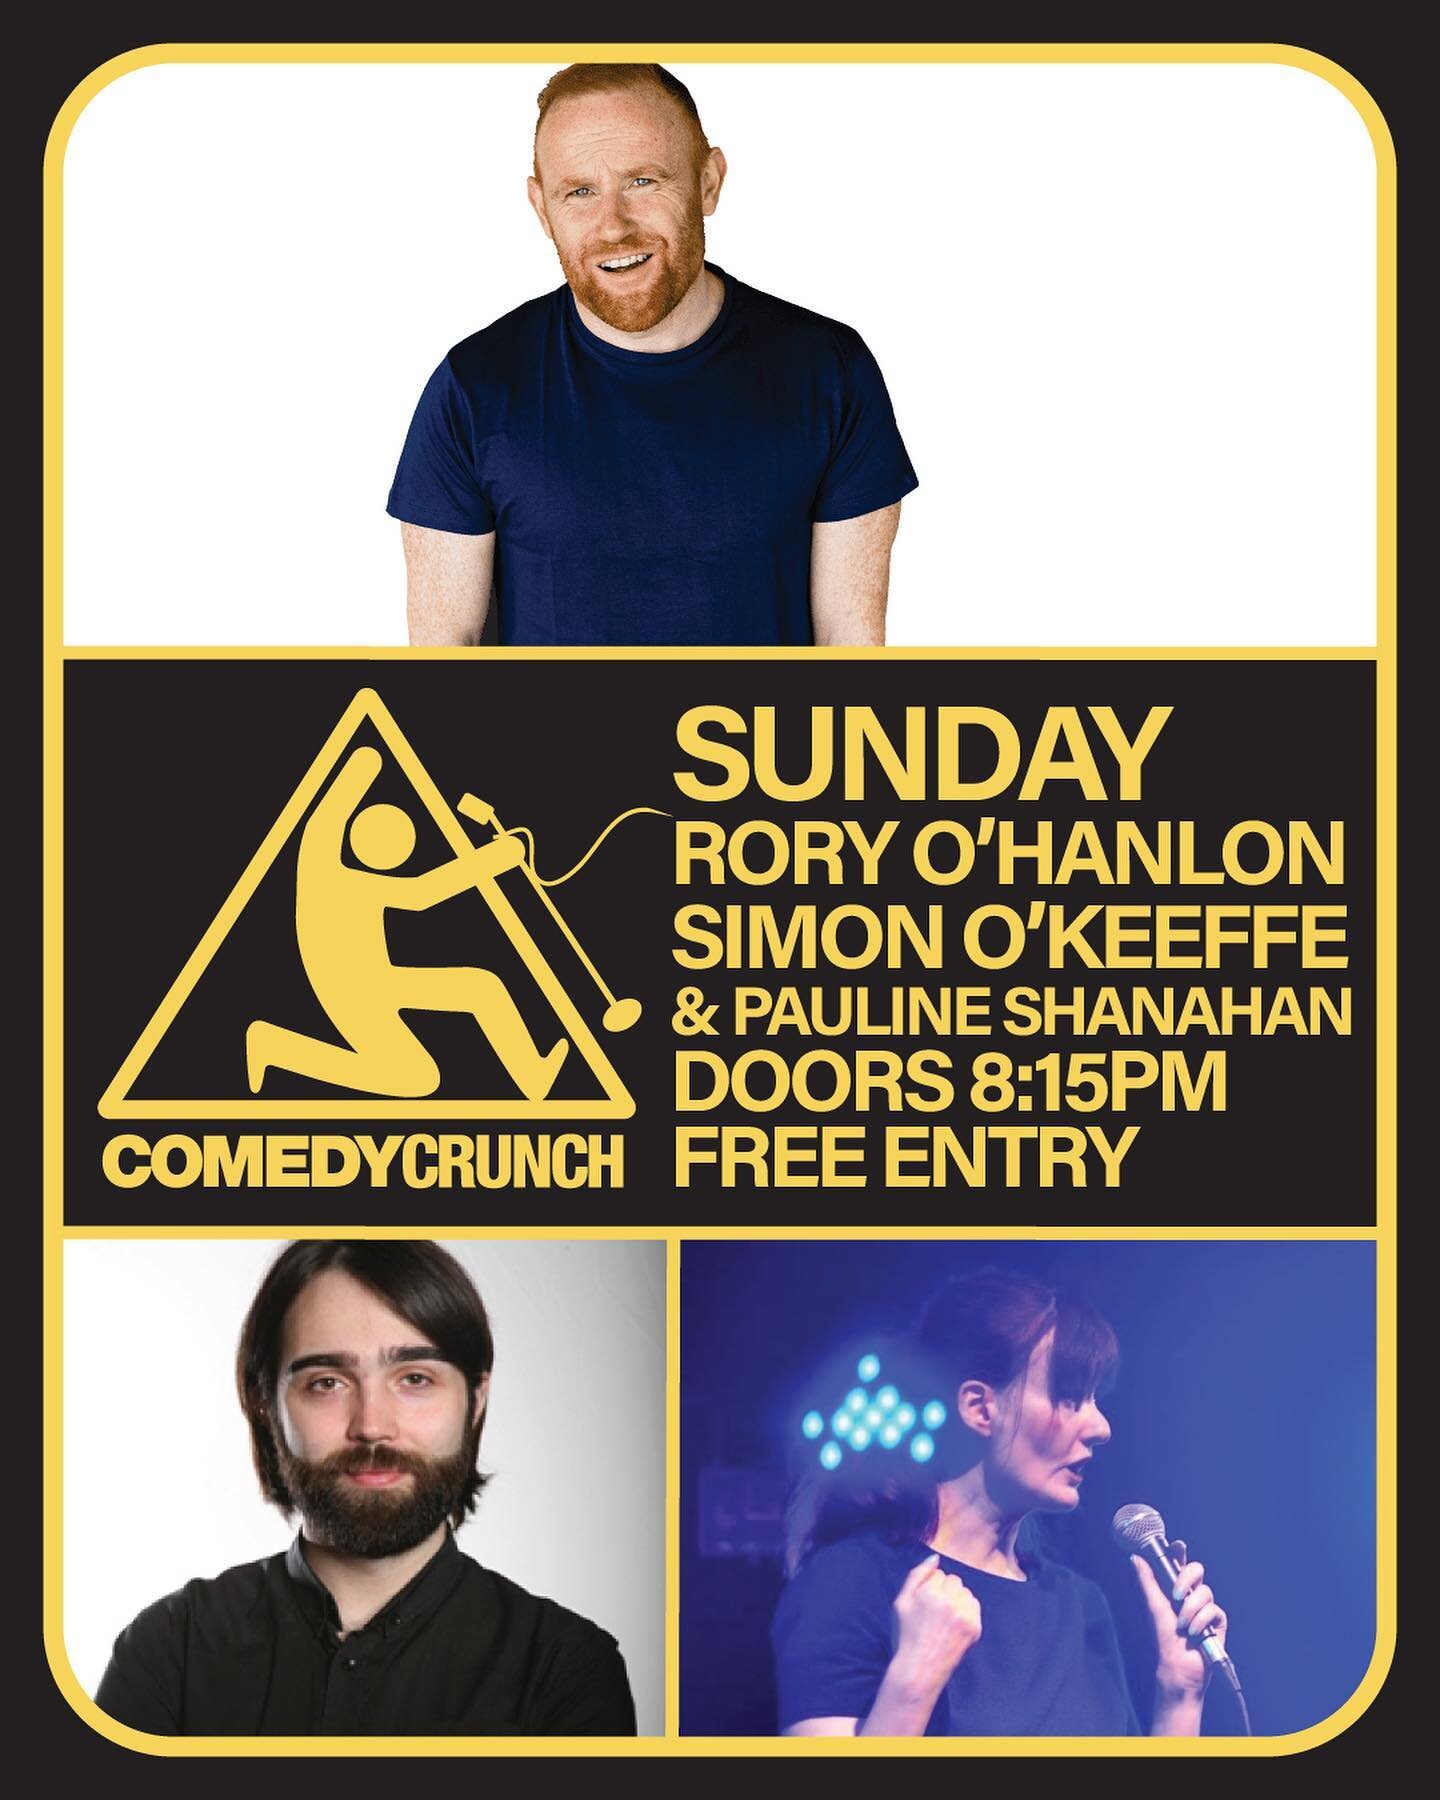 Two great shows this Sunday &amp; Monday #Dublin with RORY O&rsquo;HANLON, DANNY RYAN &amp; more 🥳